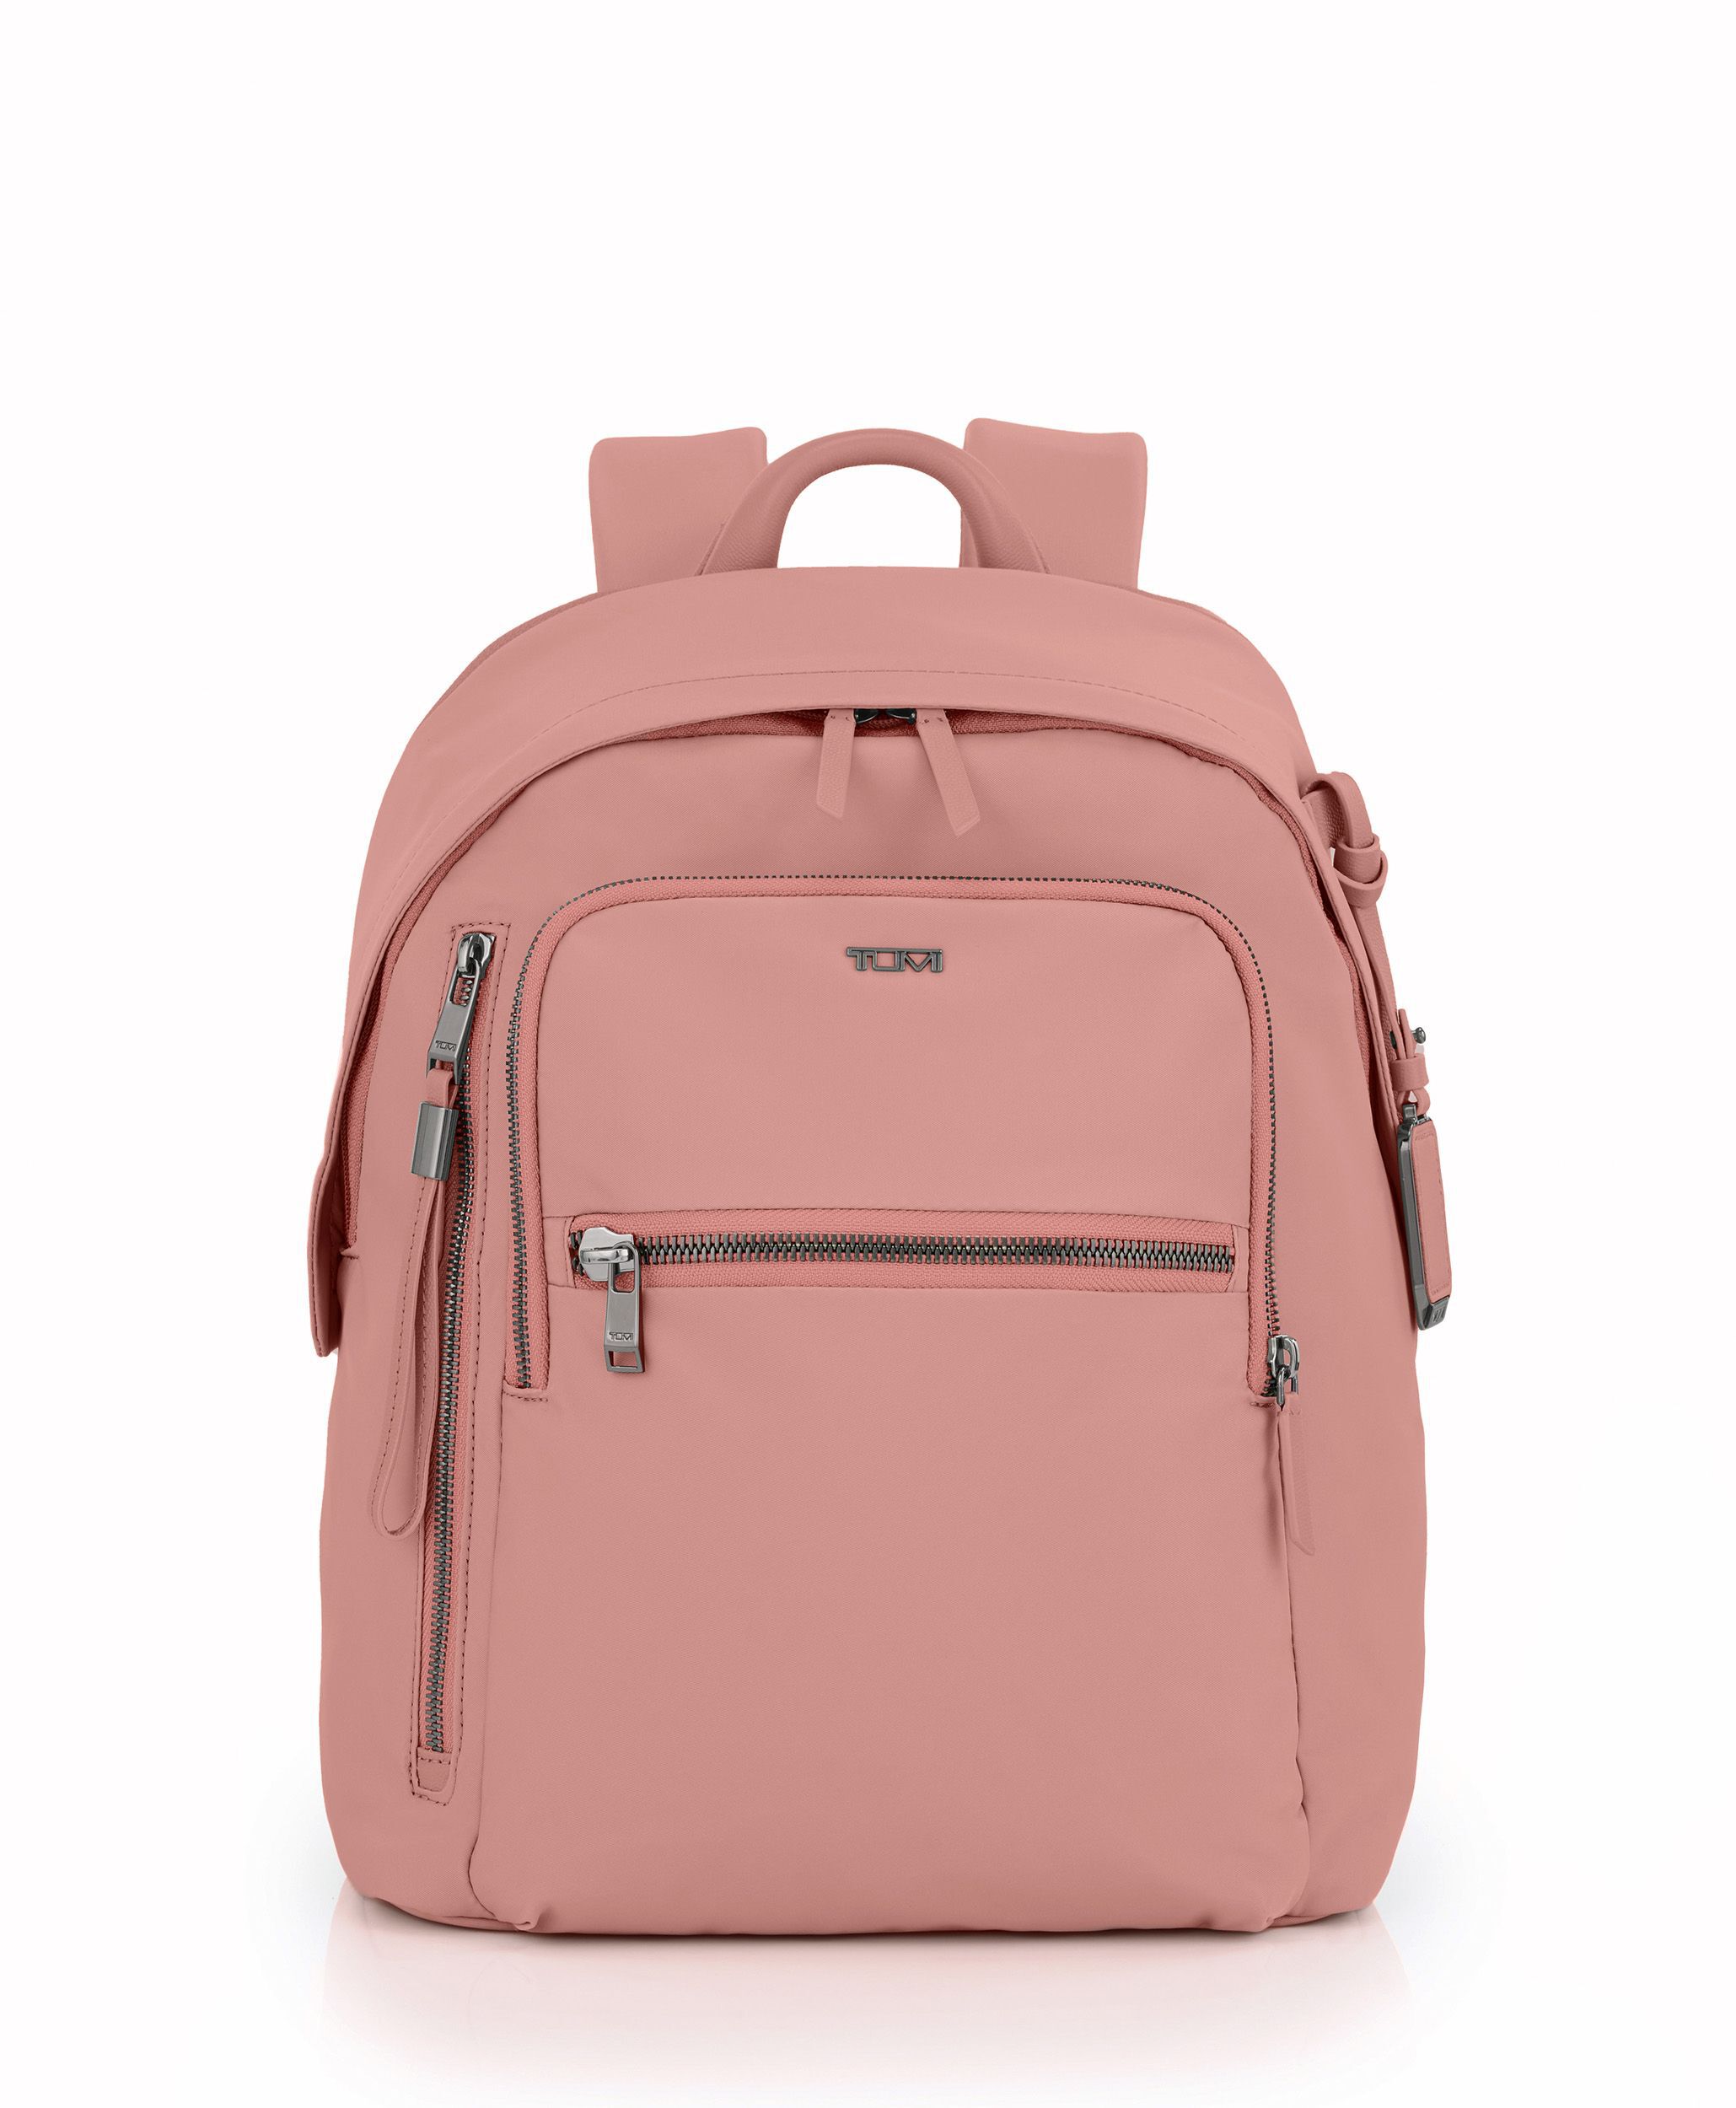 TUMI Corporate Collection Laptop Backpack